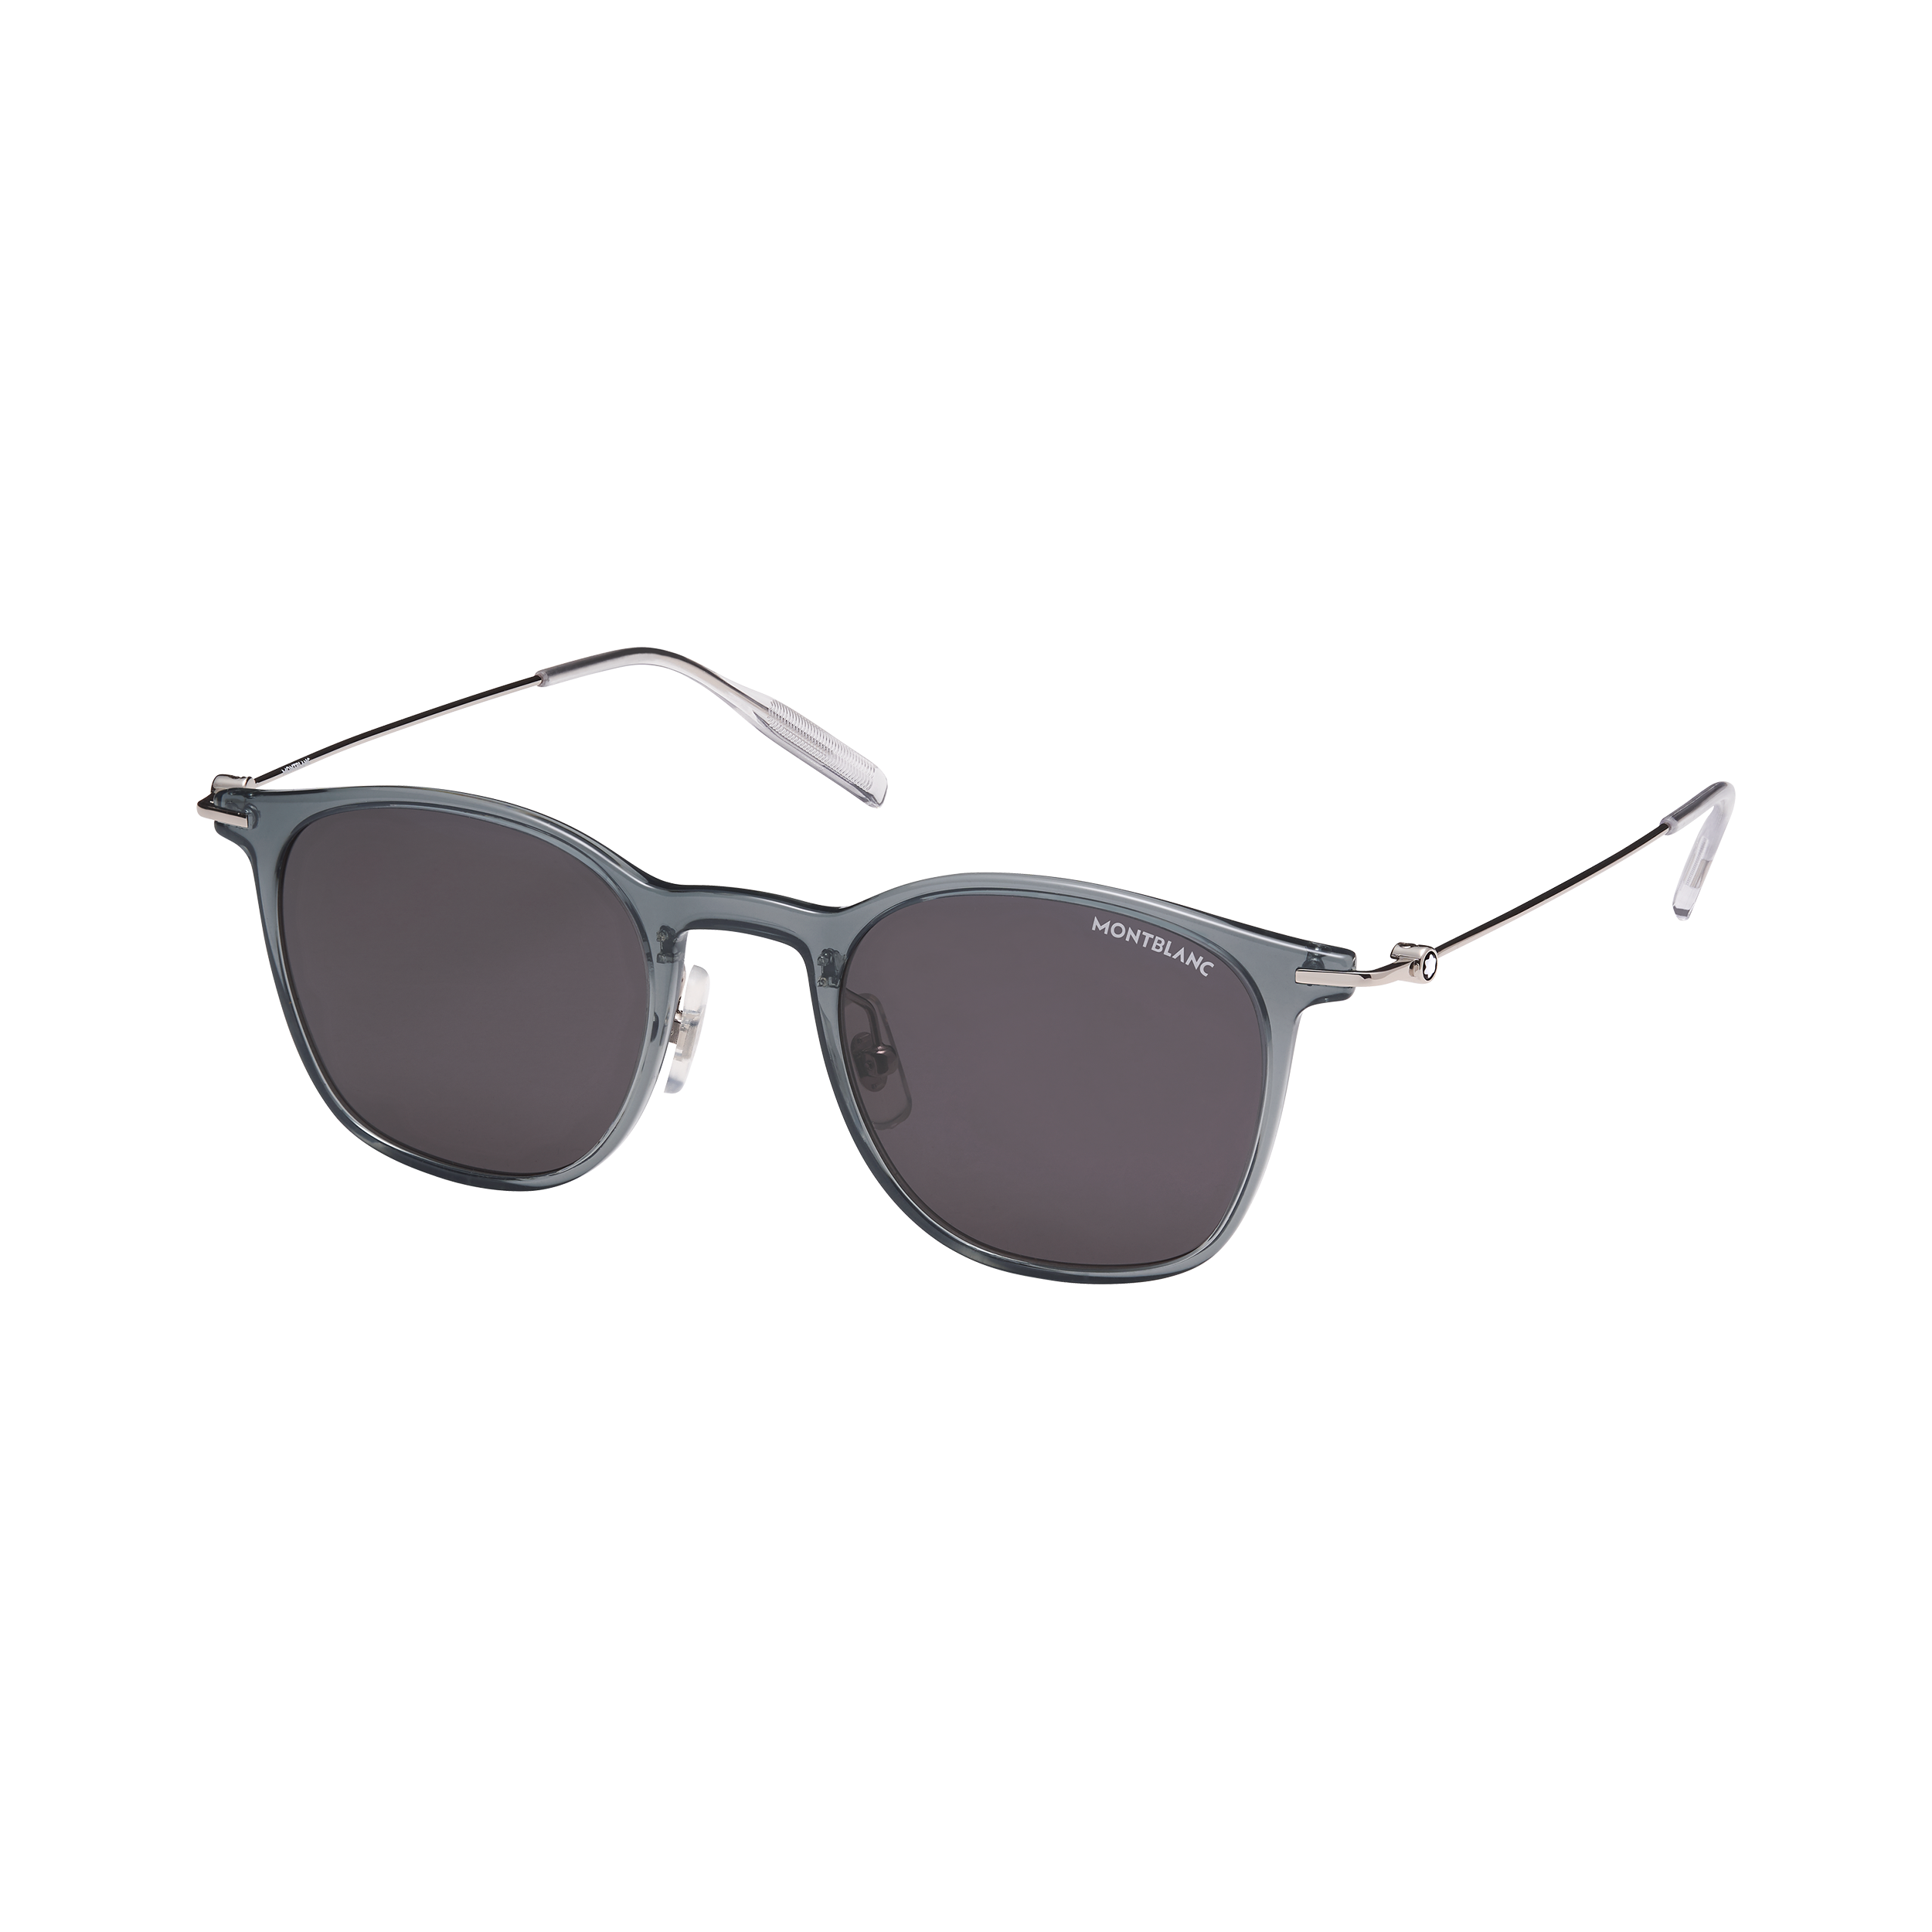 Round Injected Gray Frame Sunglasses